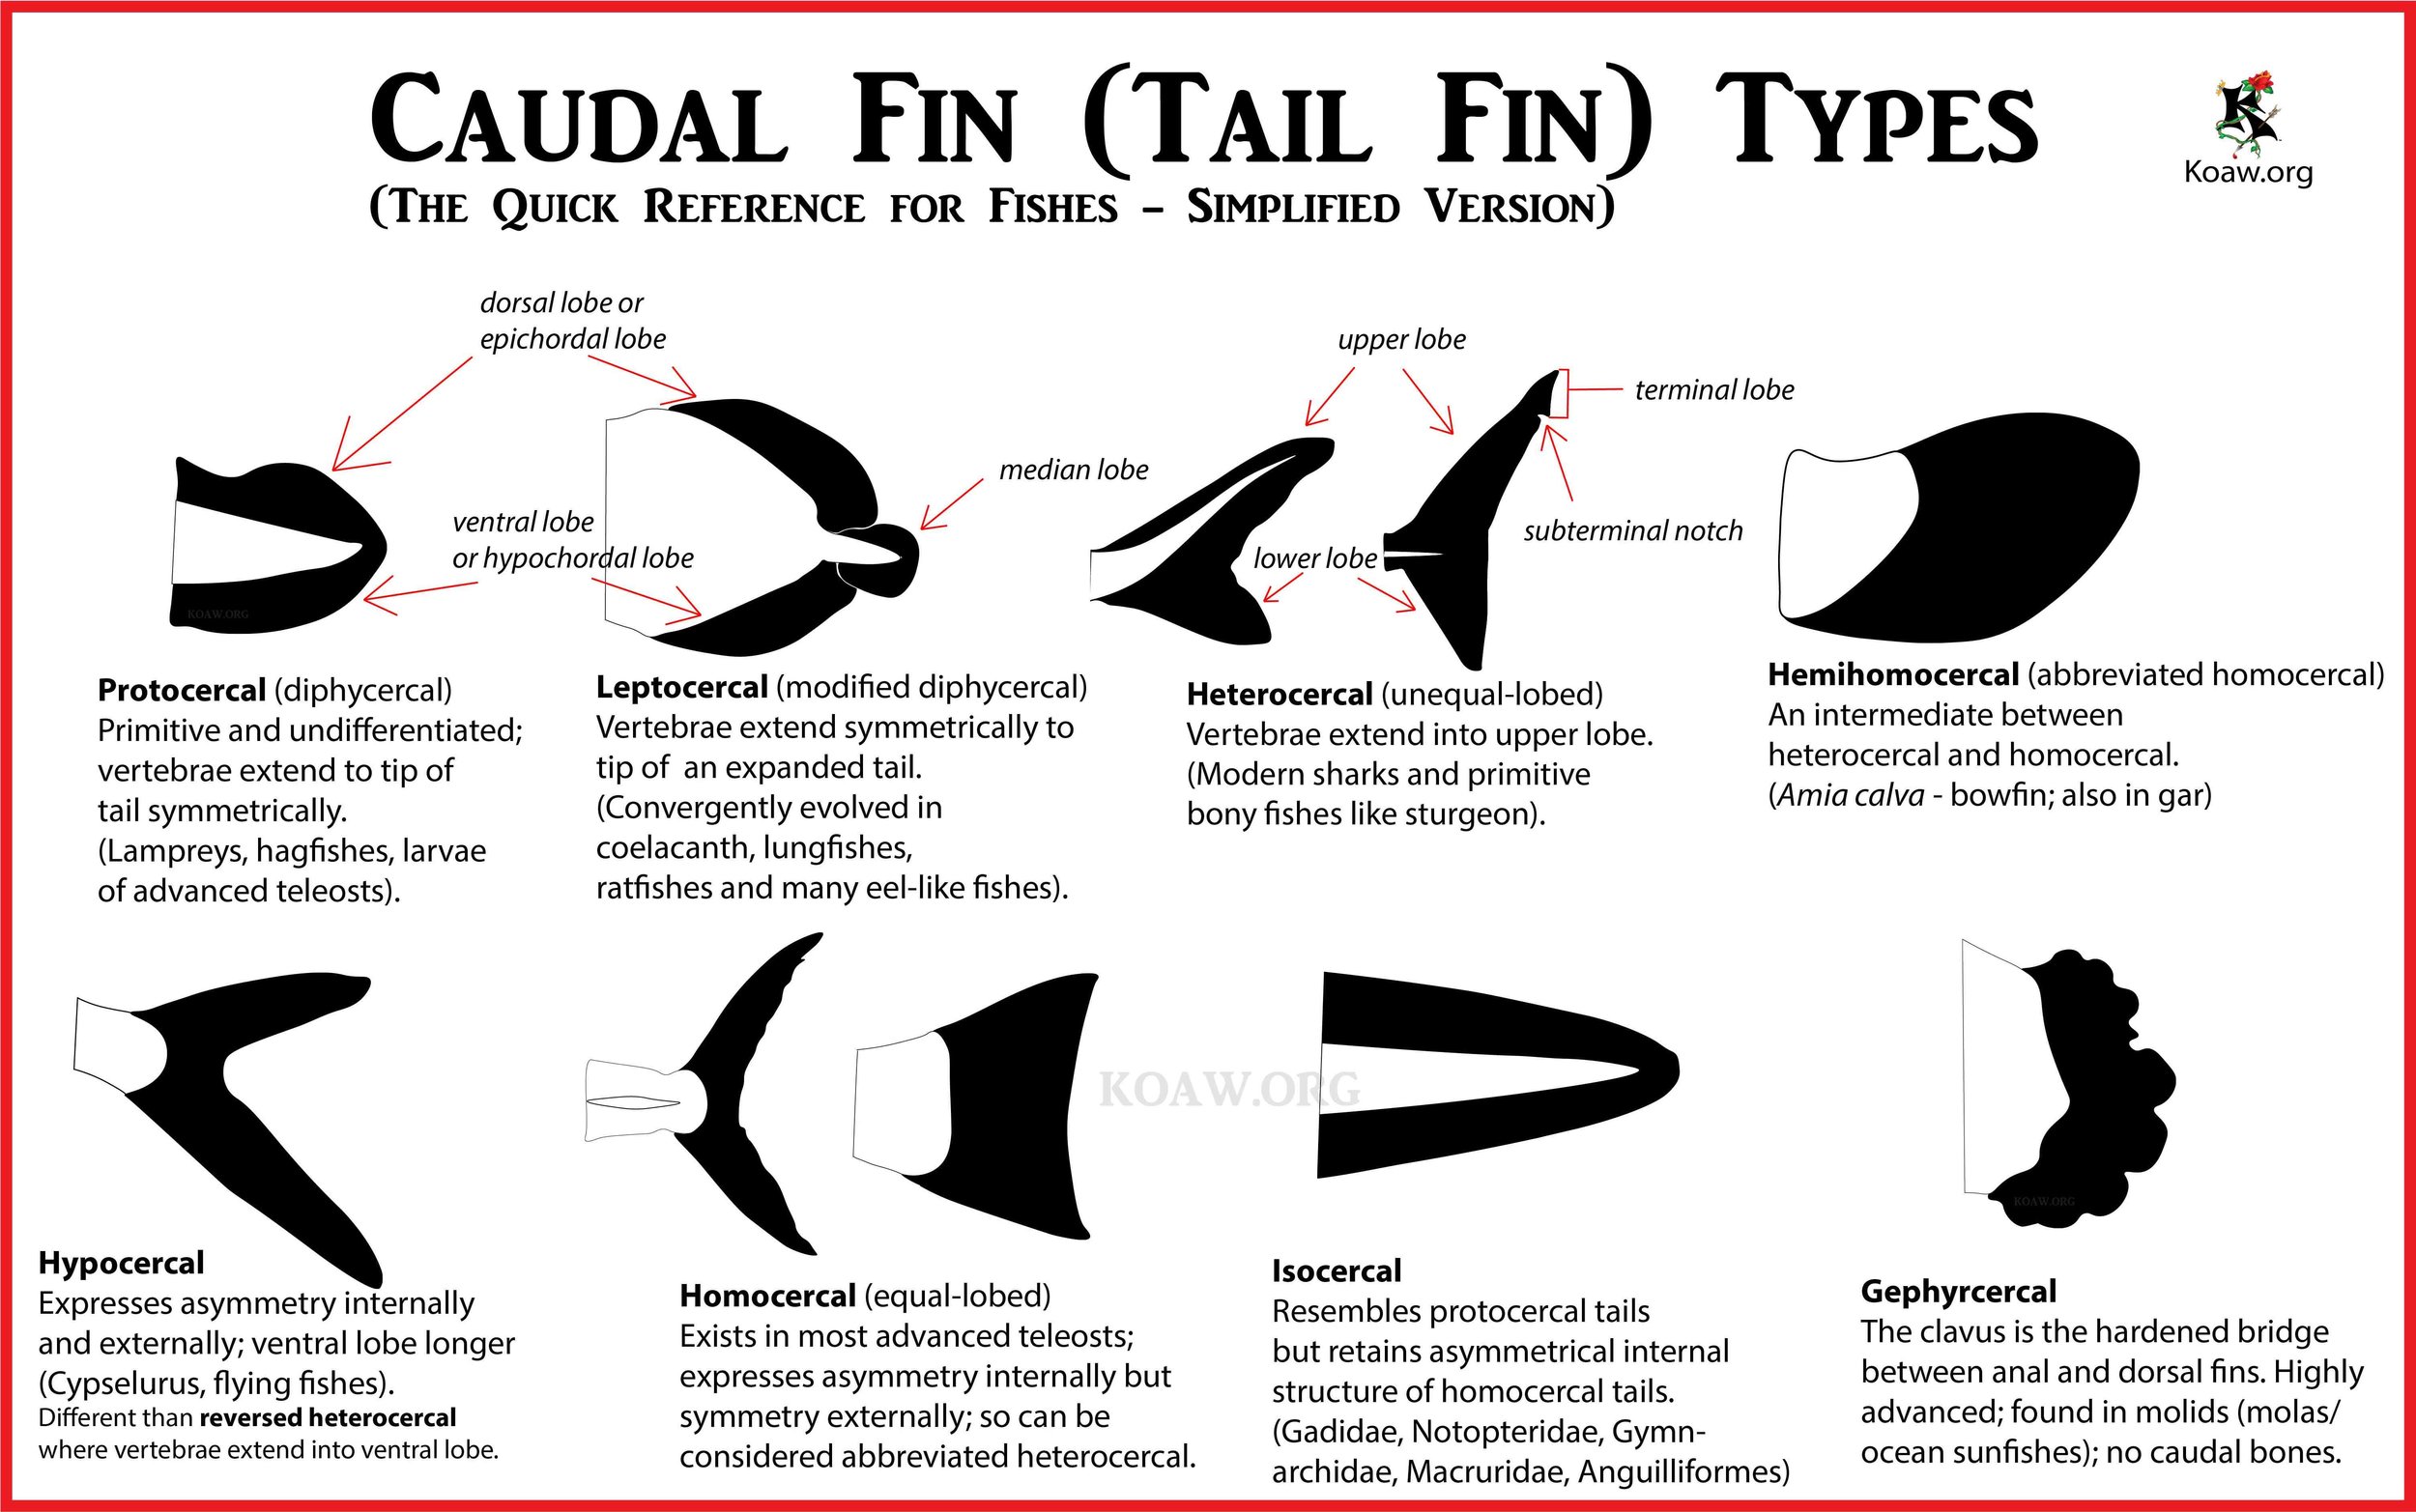 Caudal Fin (Tail Fin) Types of Fishes - By Koaw